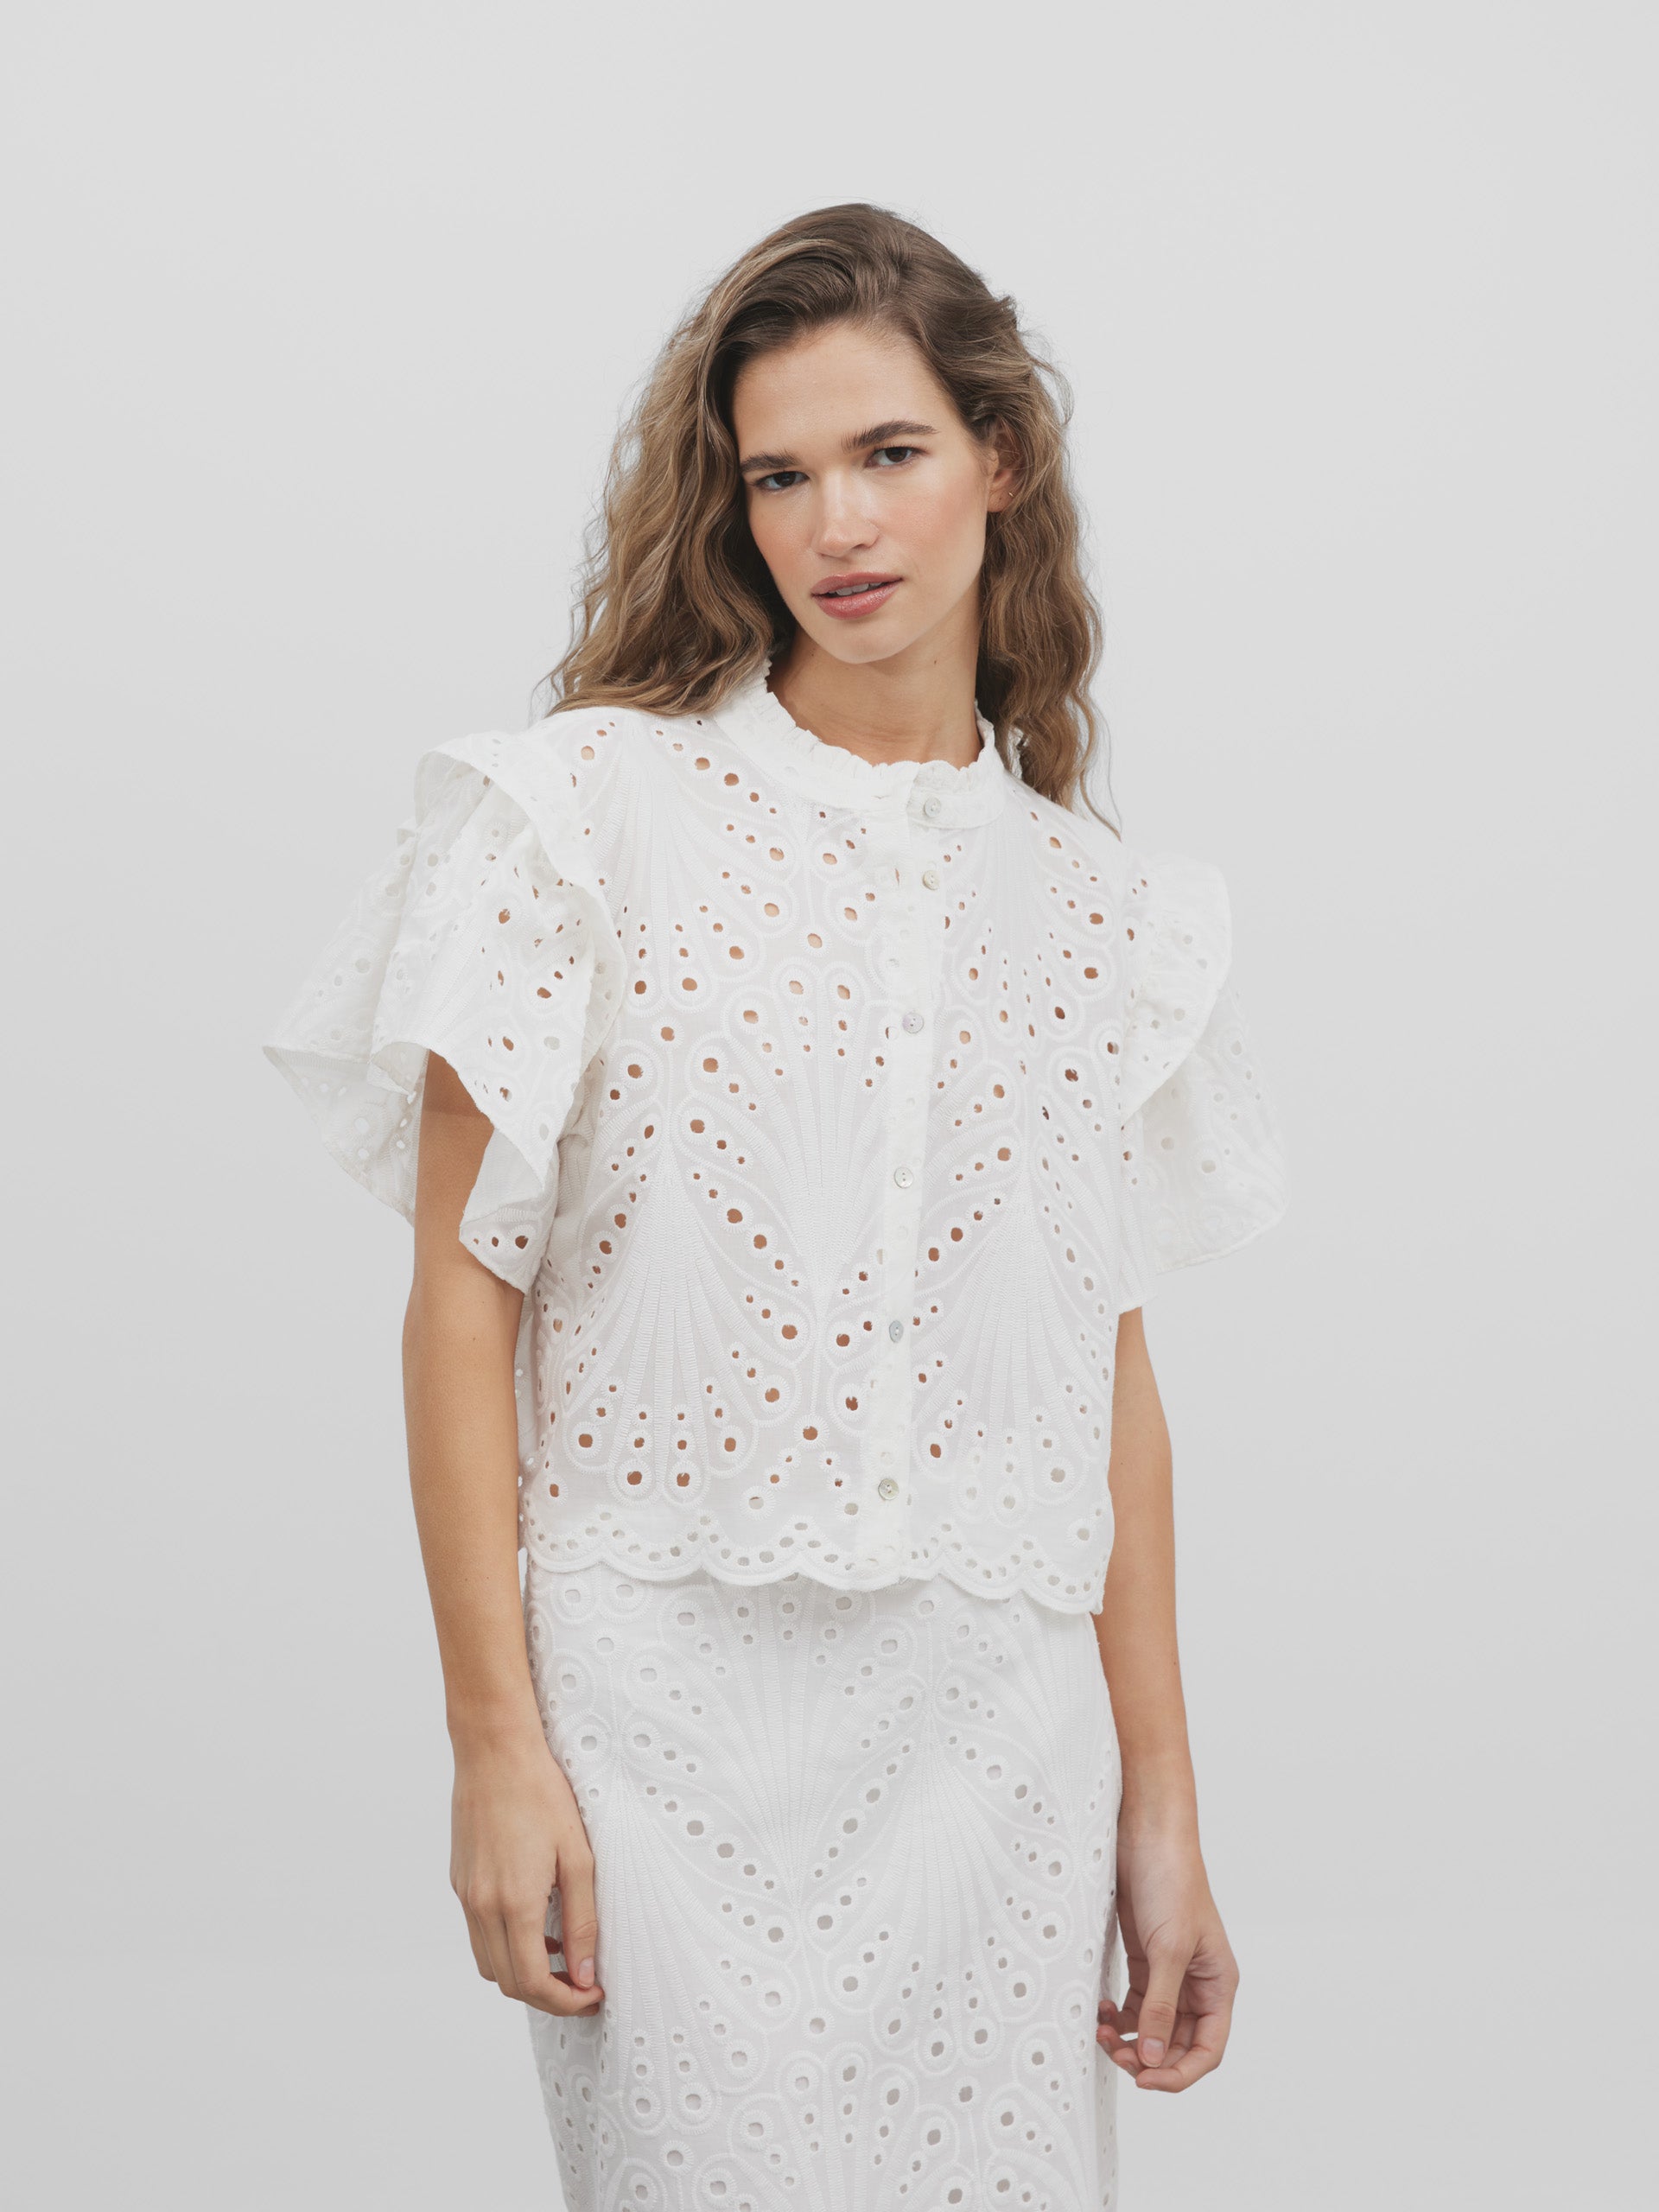 White embroidered ruffle blouse